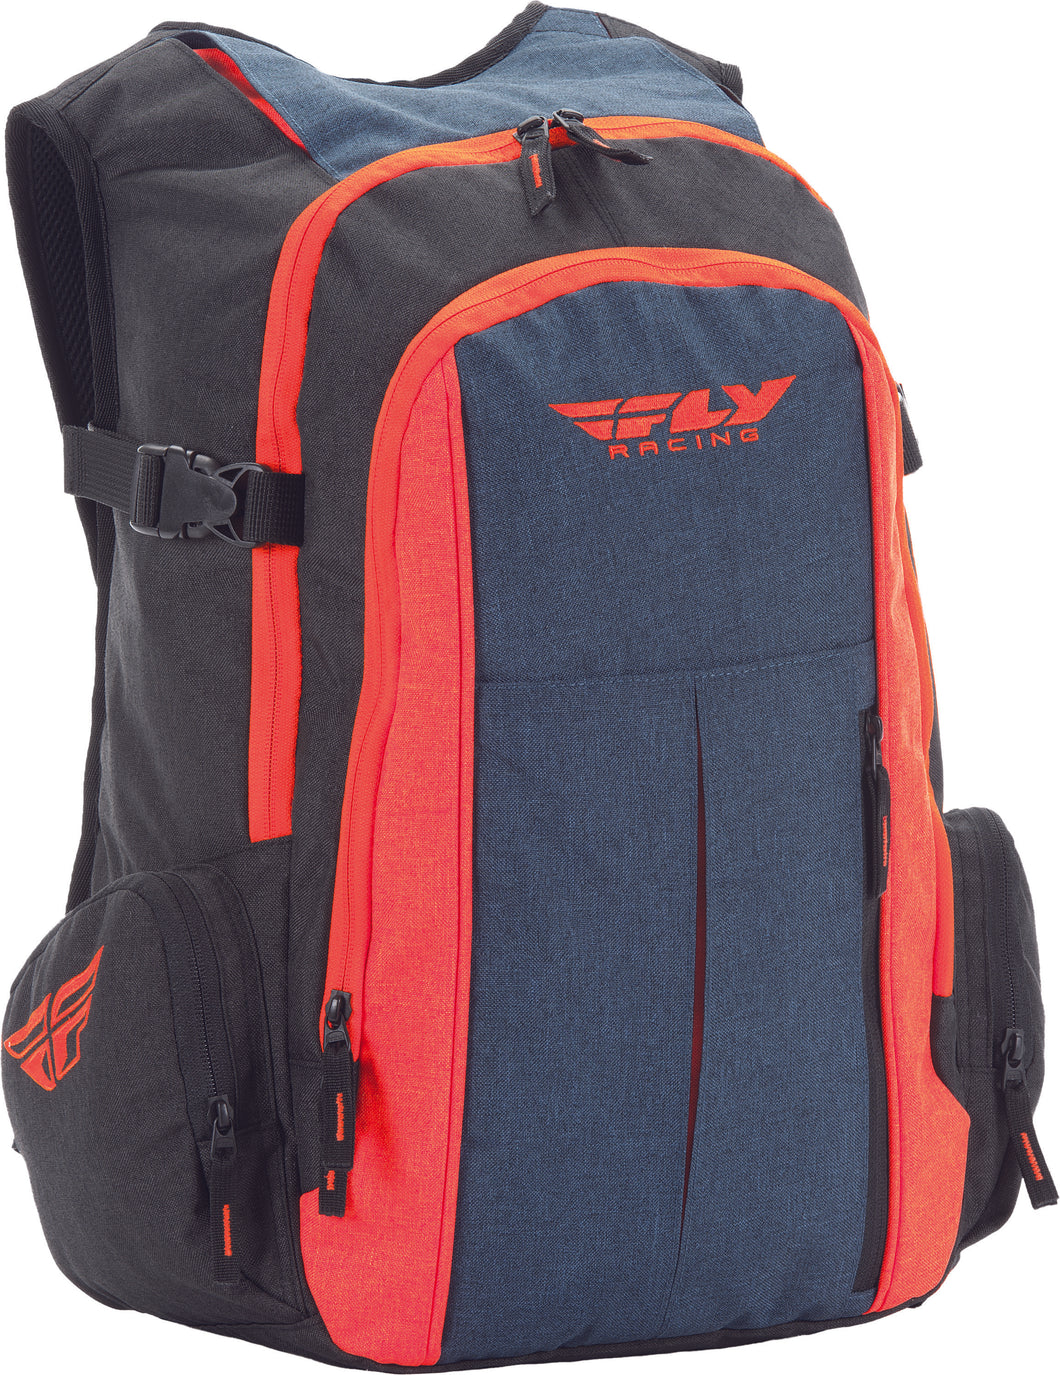 Back Country Pack Heather Blue/Orange